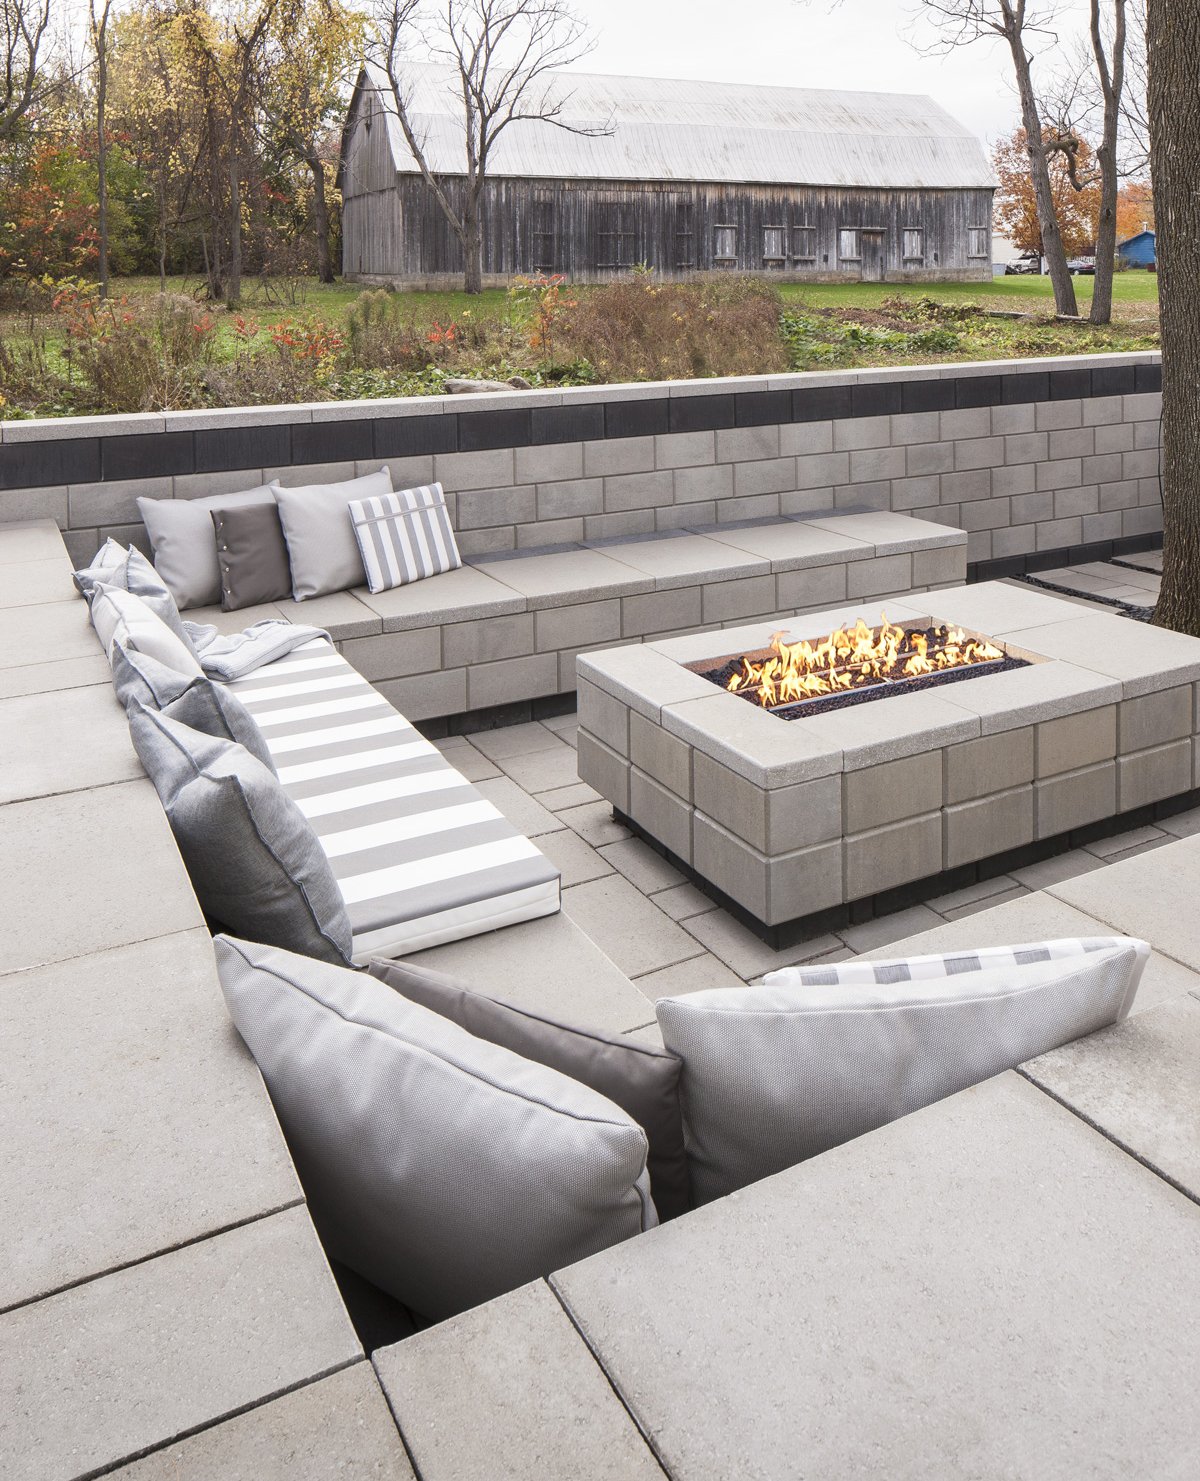 11 Amazing Stone Fire Pit Ideas For, How To Make A Fire Pit On Concrete Slab